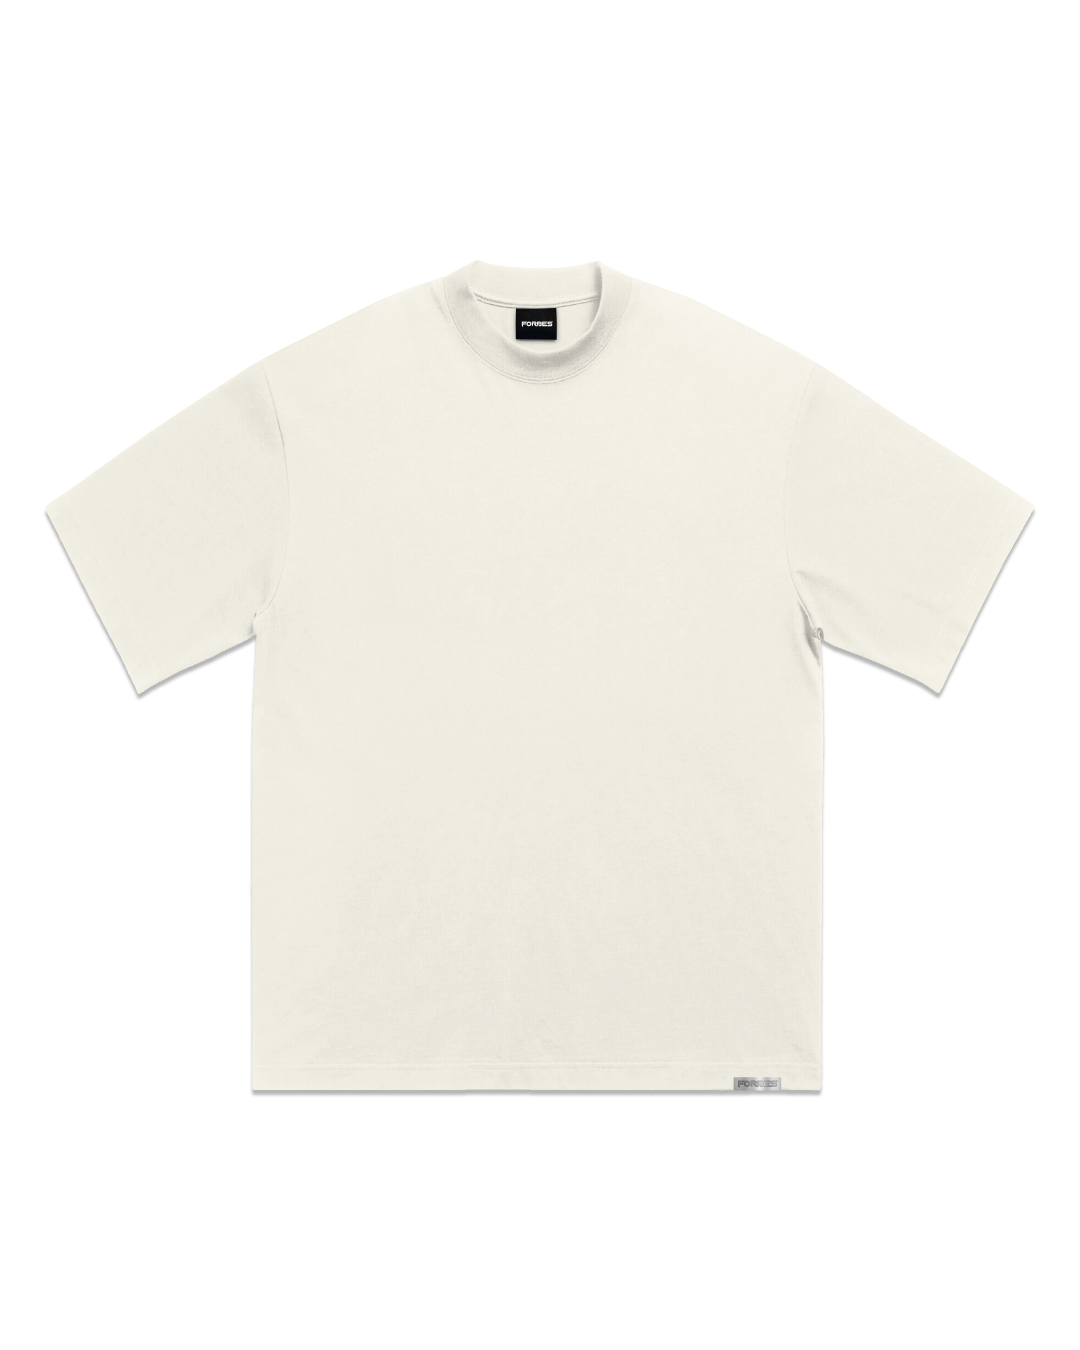 LUX Blank T-Shirt